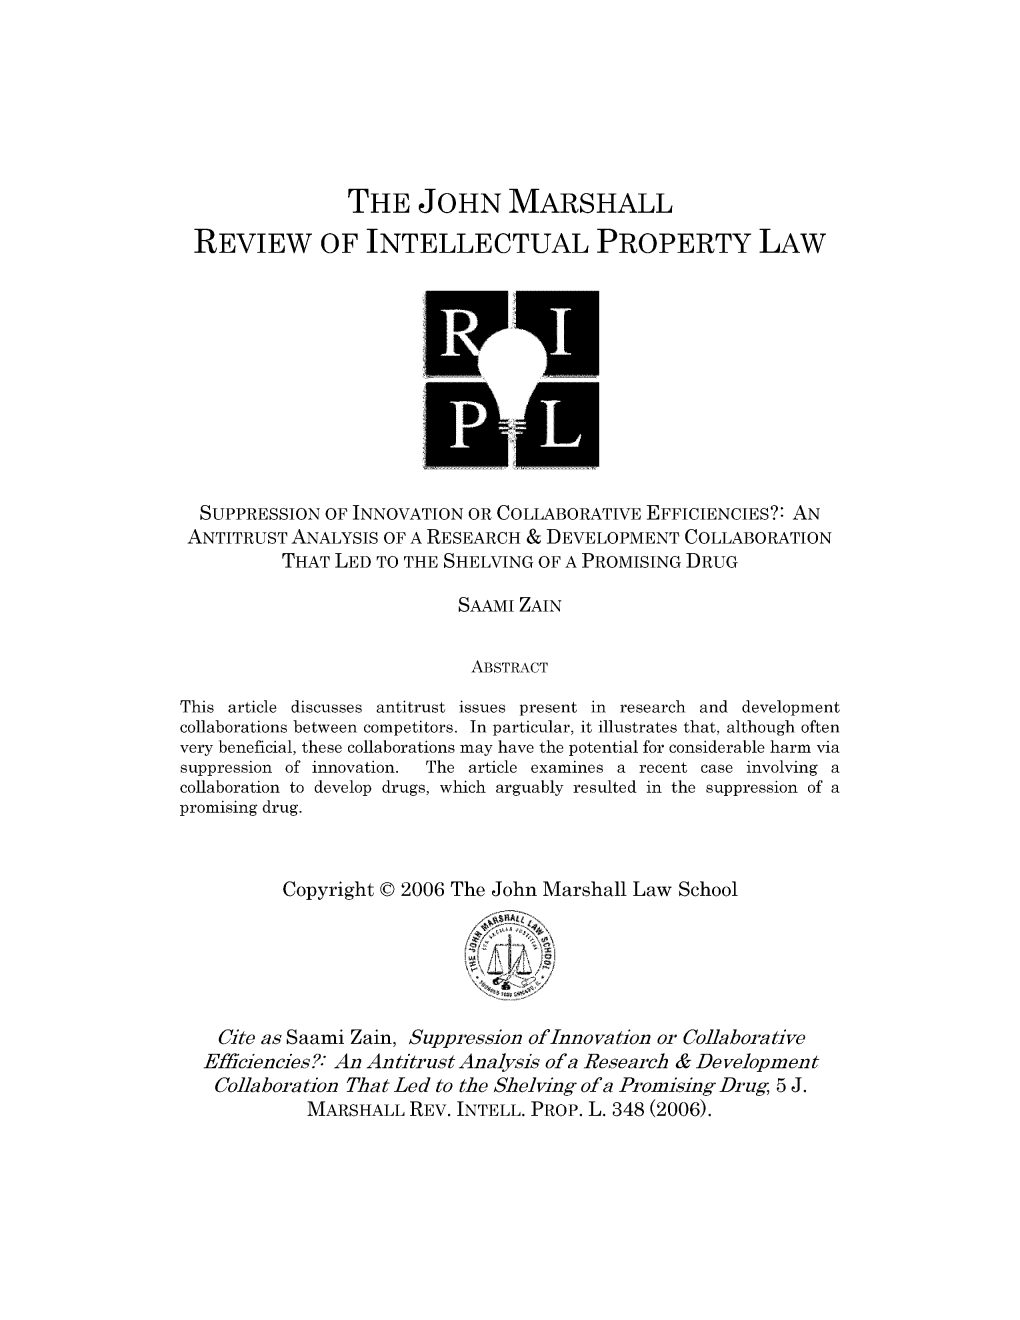 An Antitrust Analysis of a Research & Development Collaboration Th